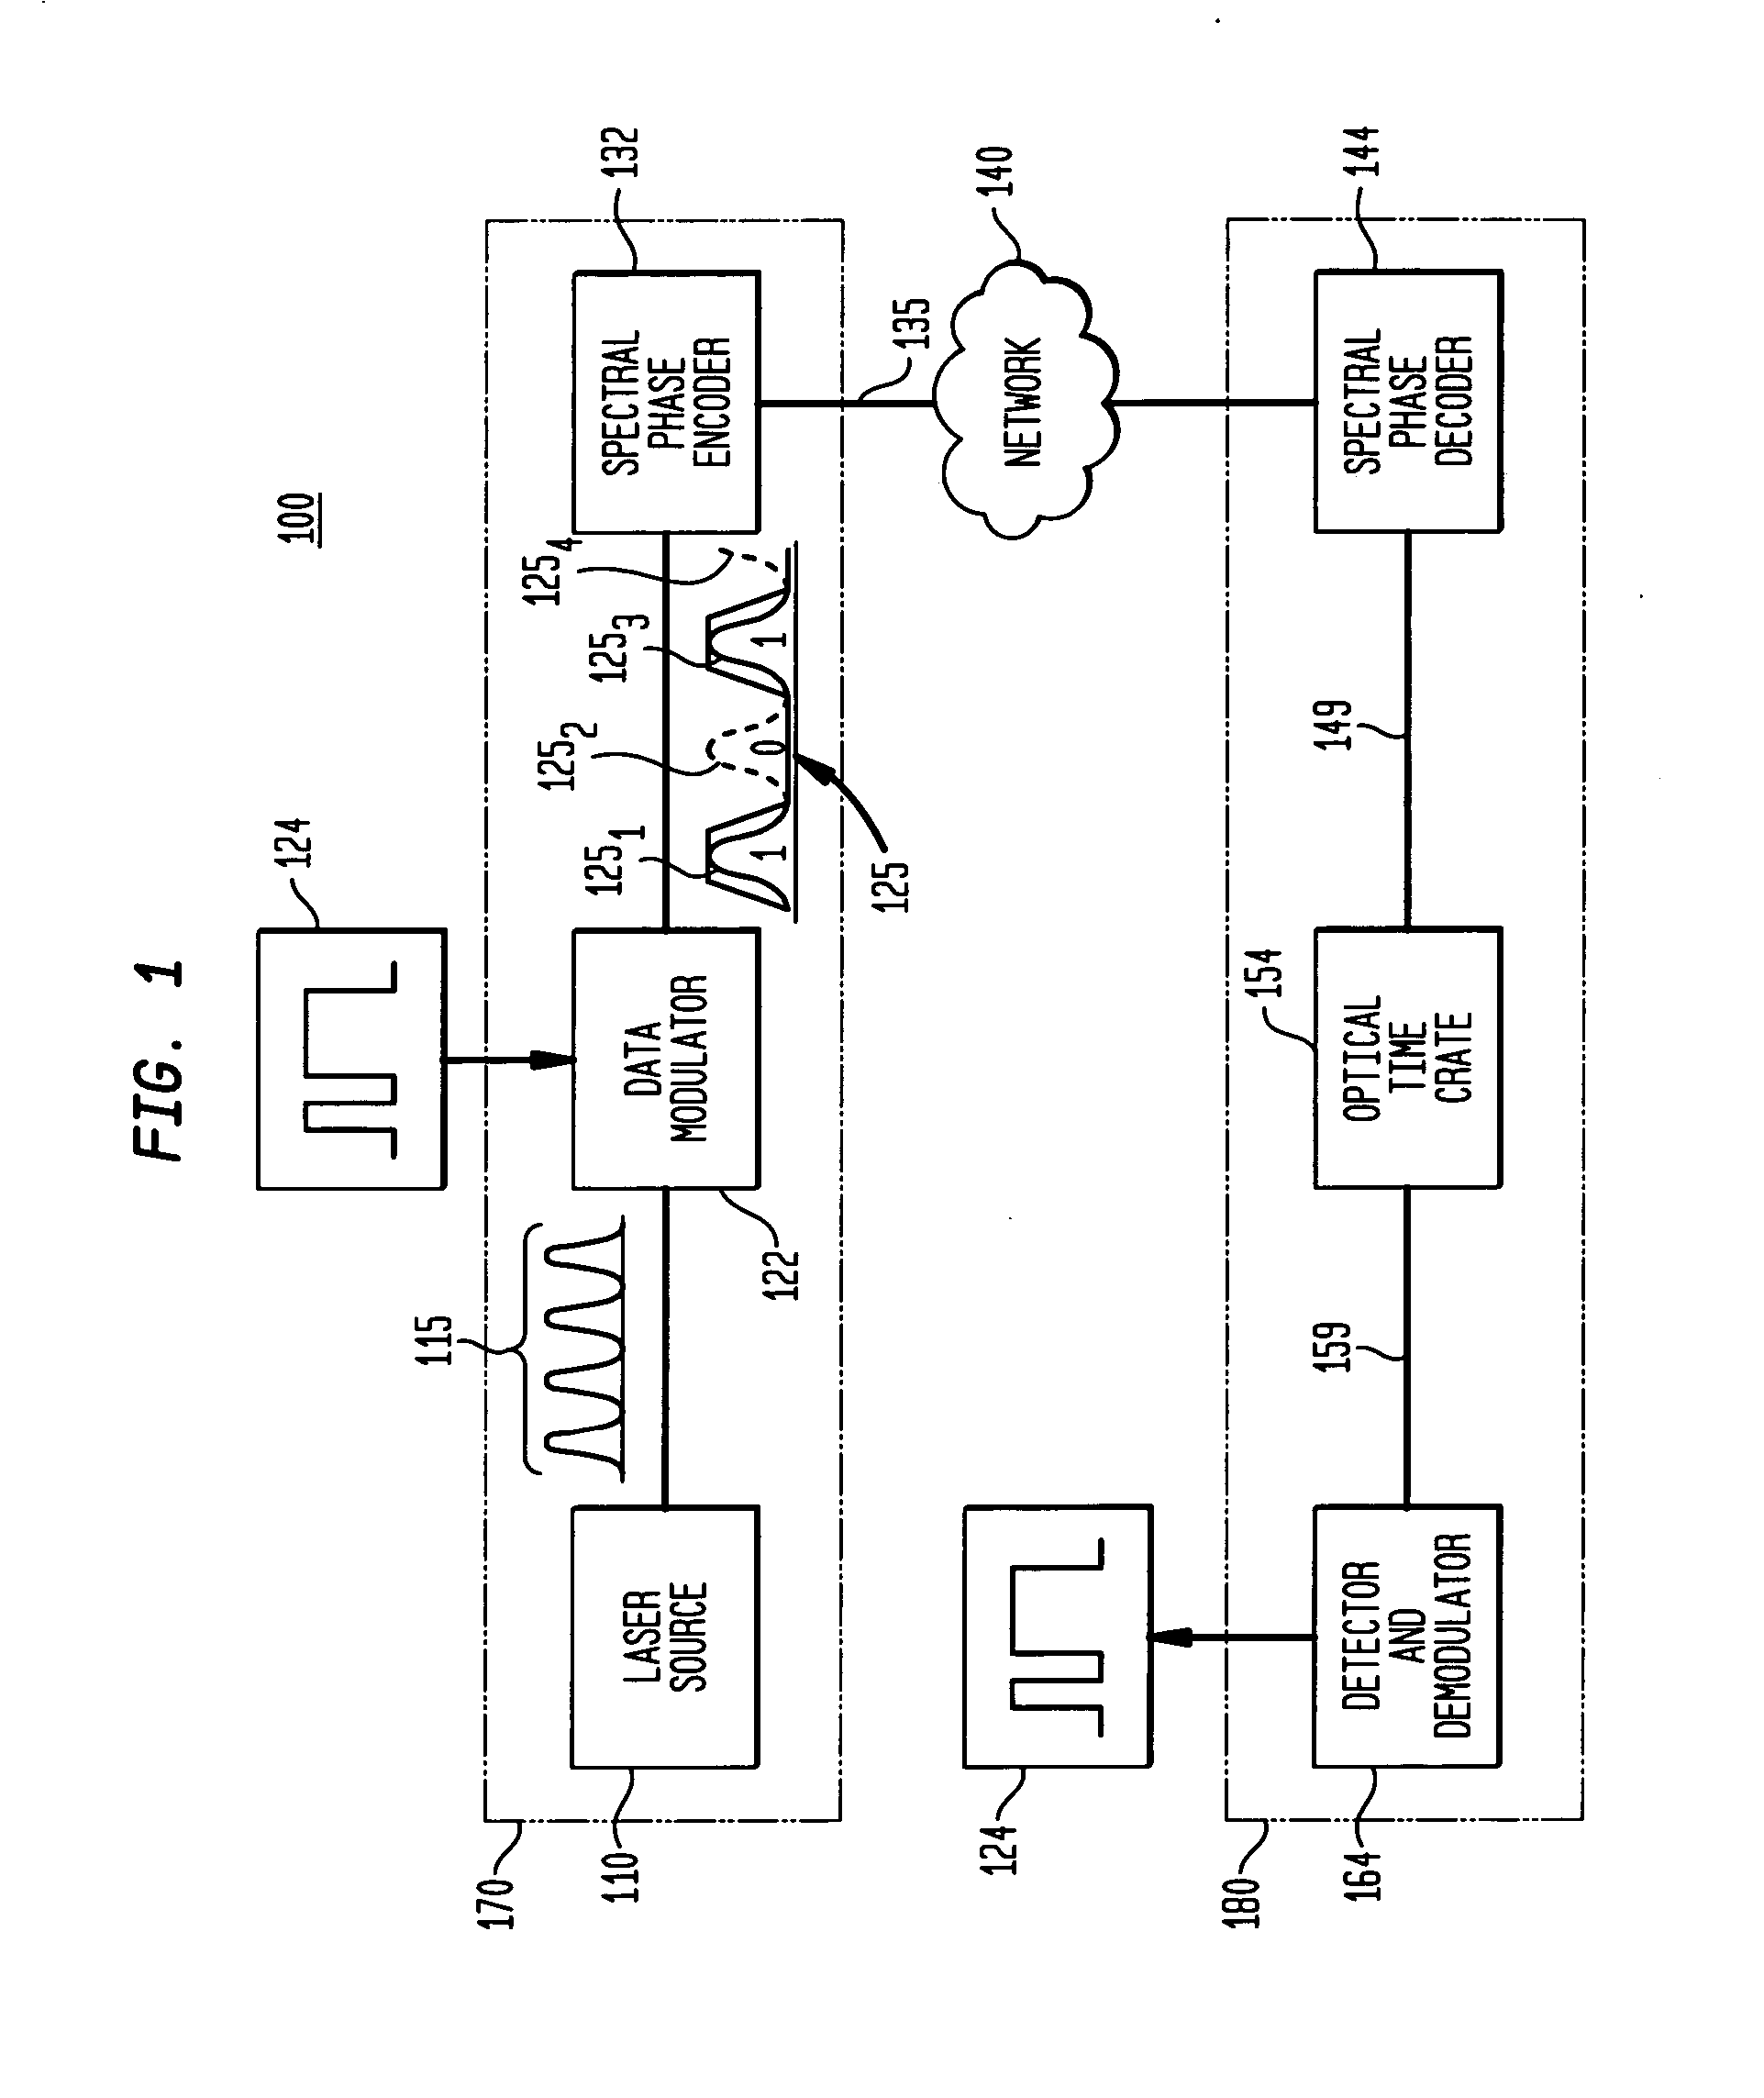 Phase chip frequency-bins optical code division multiple access